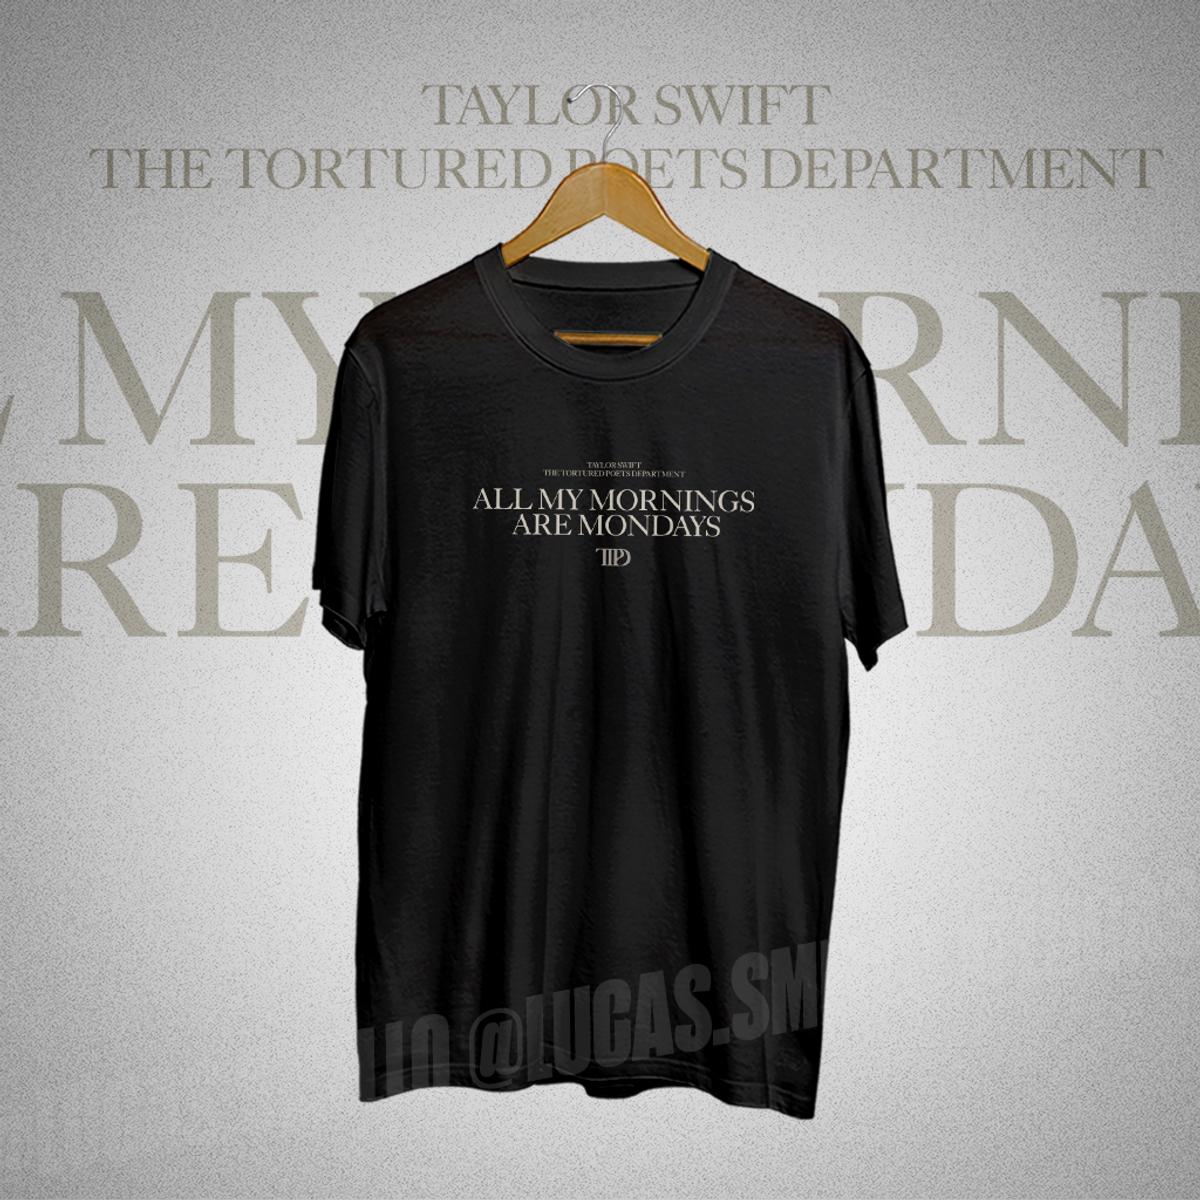 Nome do produto: Taylor Swift TTPD All my mornings are mondays